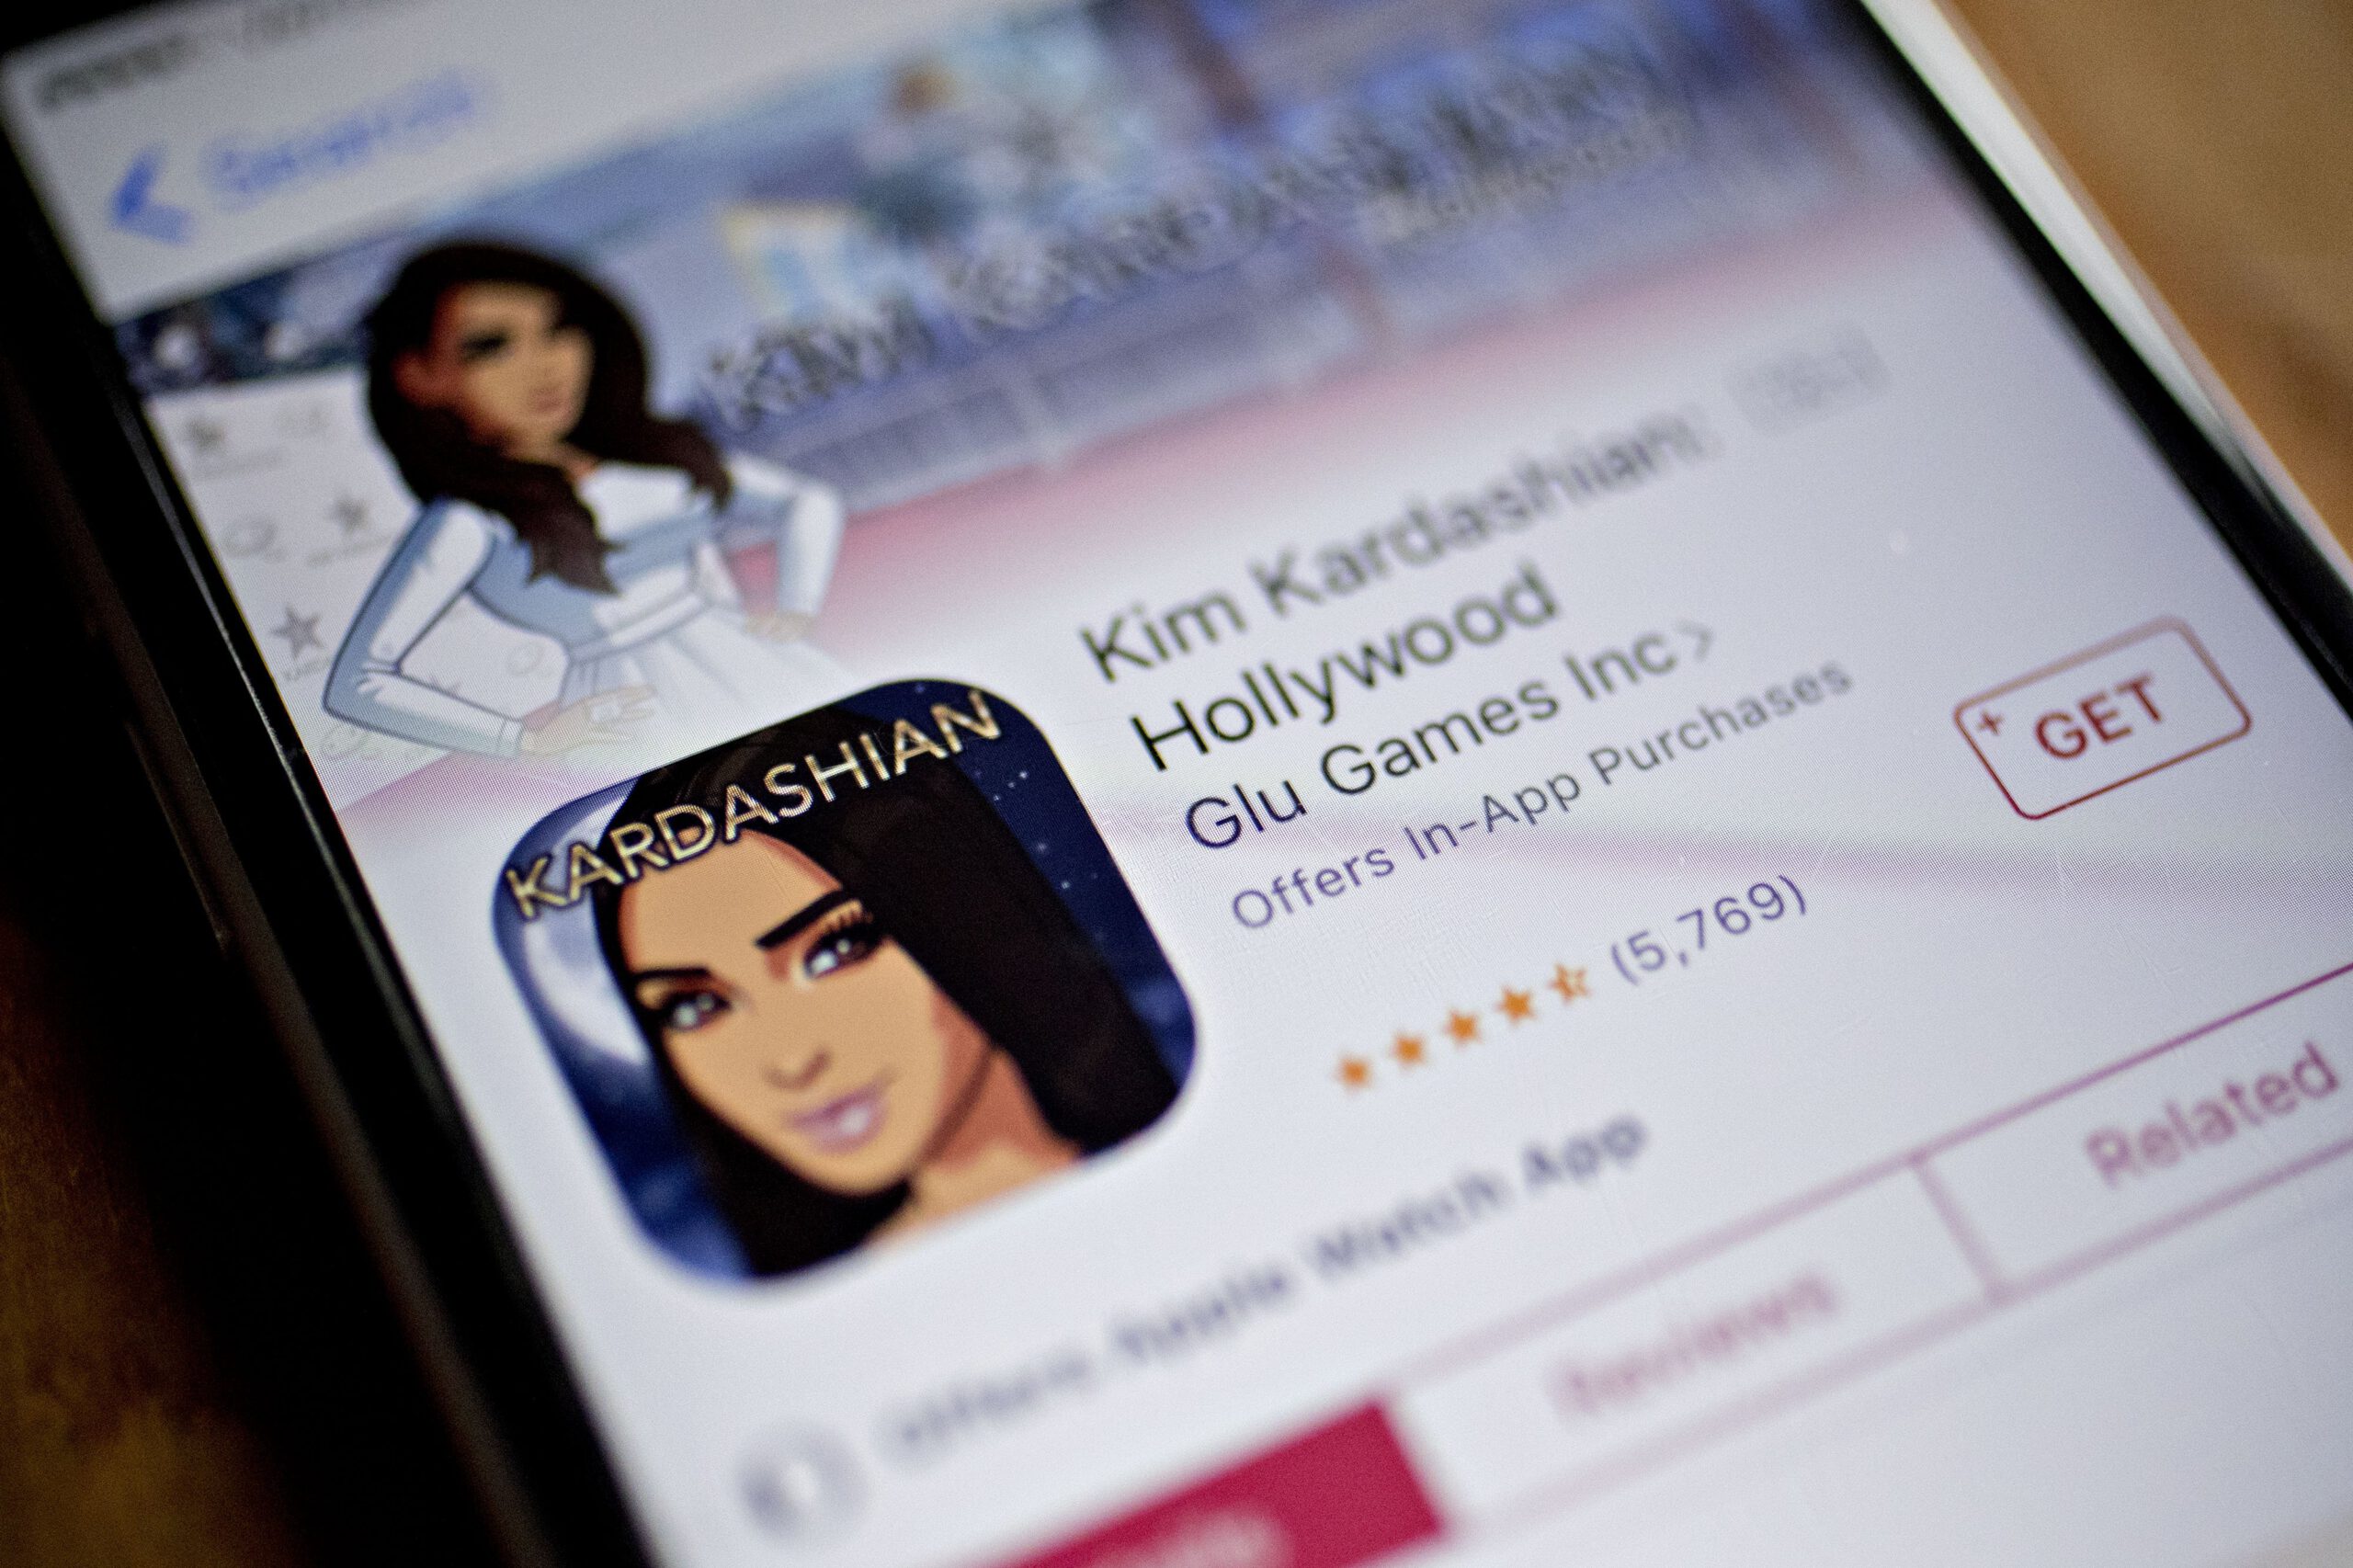 Mobile phone with the Kim Kardashian: Hollywood app store listing on it.